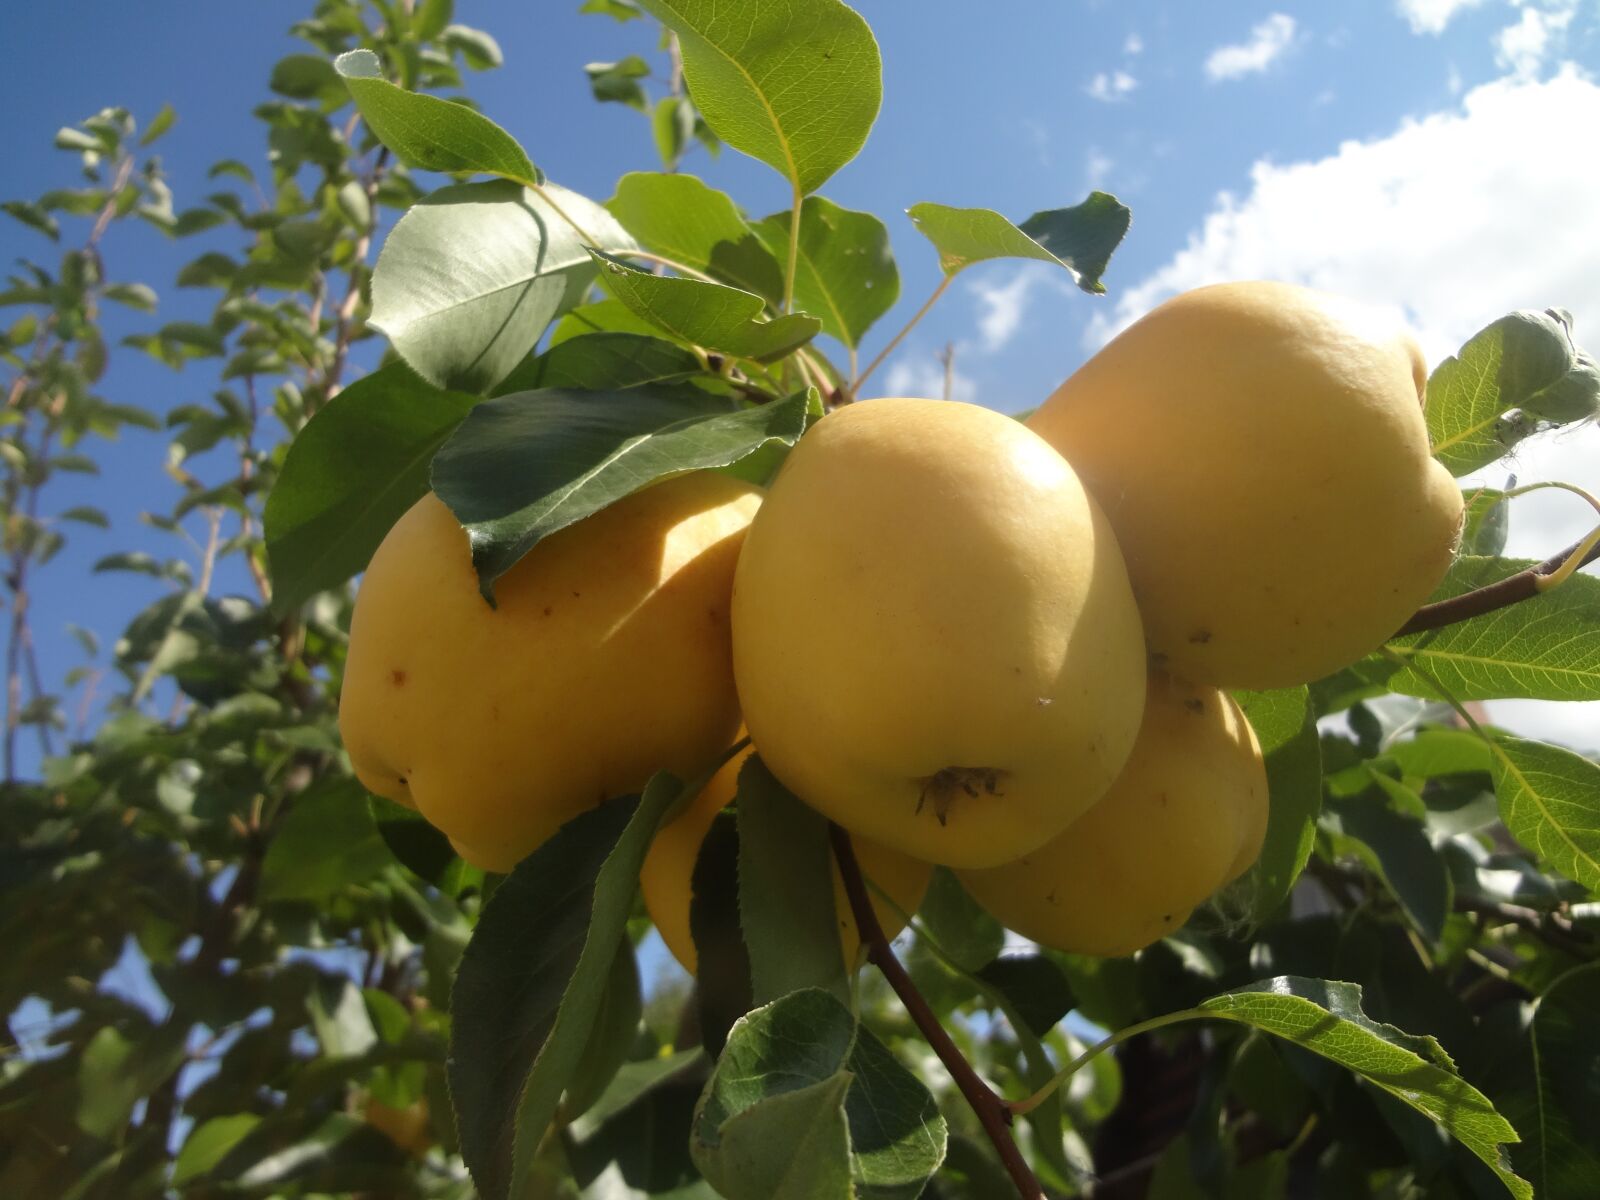 Sony Cyber-shot DSC-WX50 sample photo. Fruits pears summer harvest photography